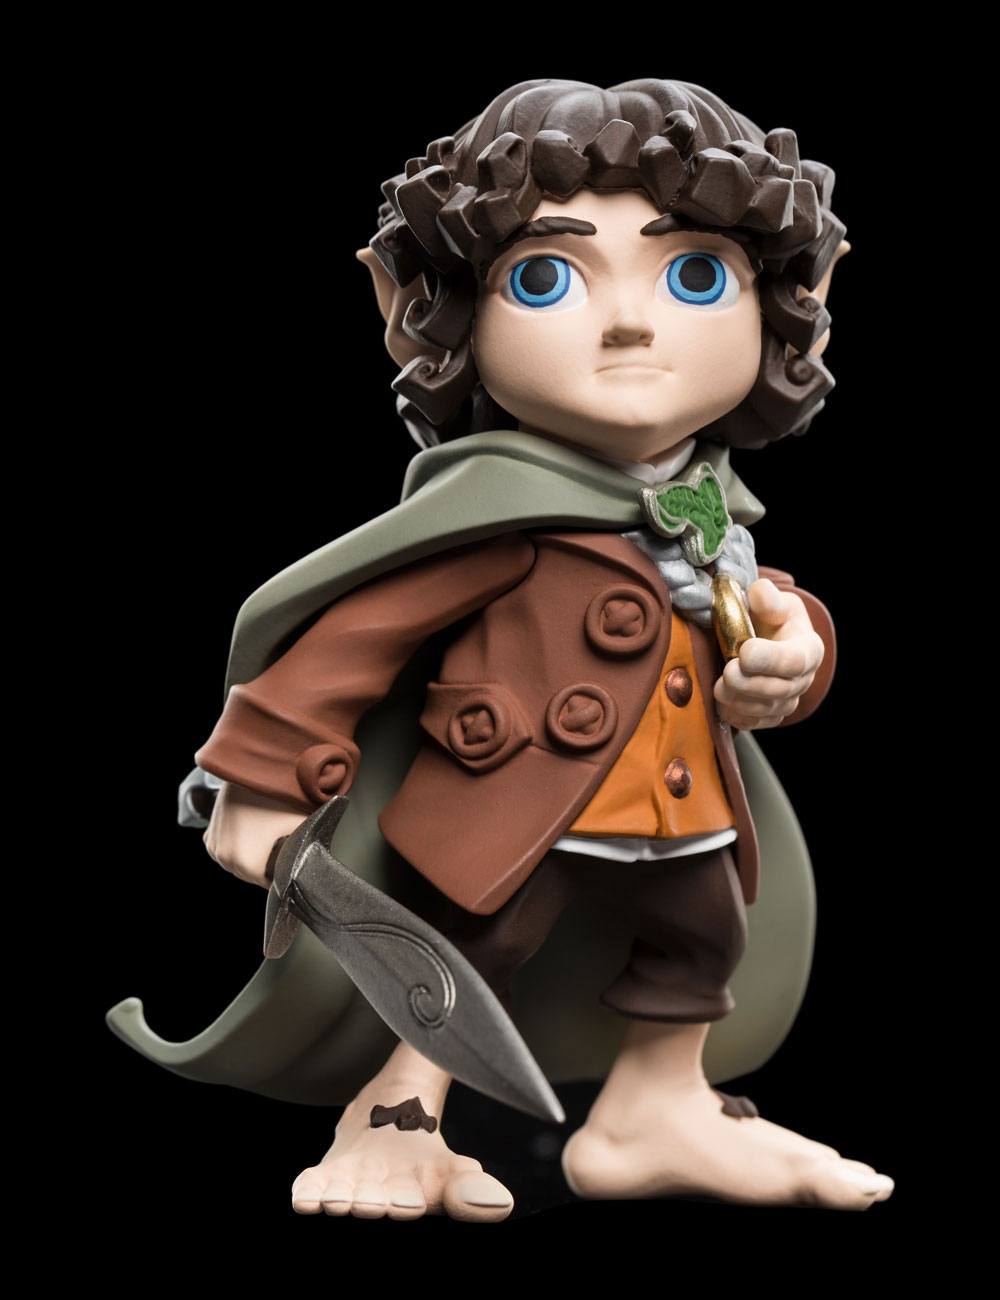 Lord of the Rings Mini Epics Vinyl Figure Frodo Baggins 11 cm - Damaged packaging